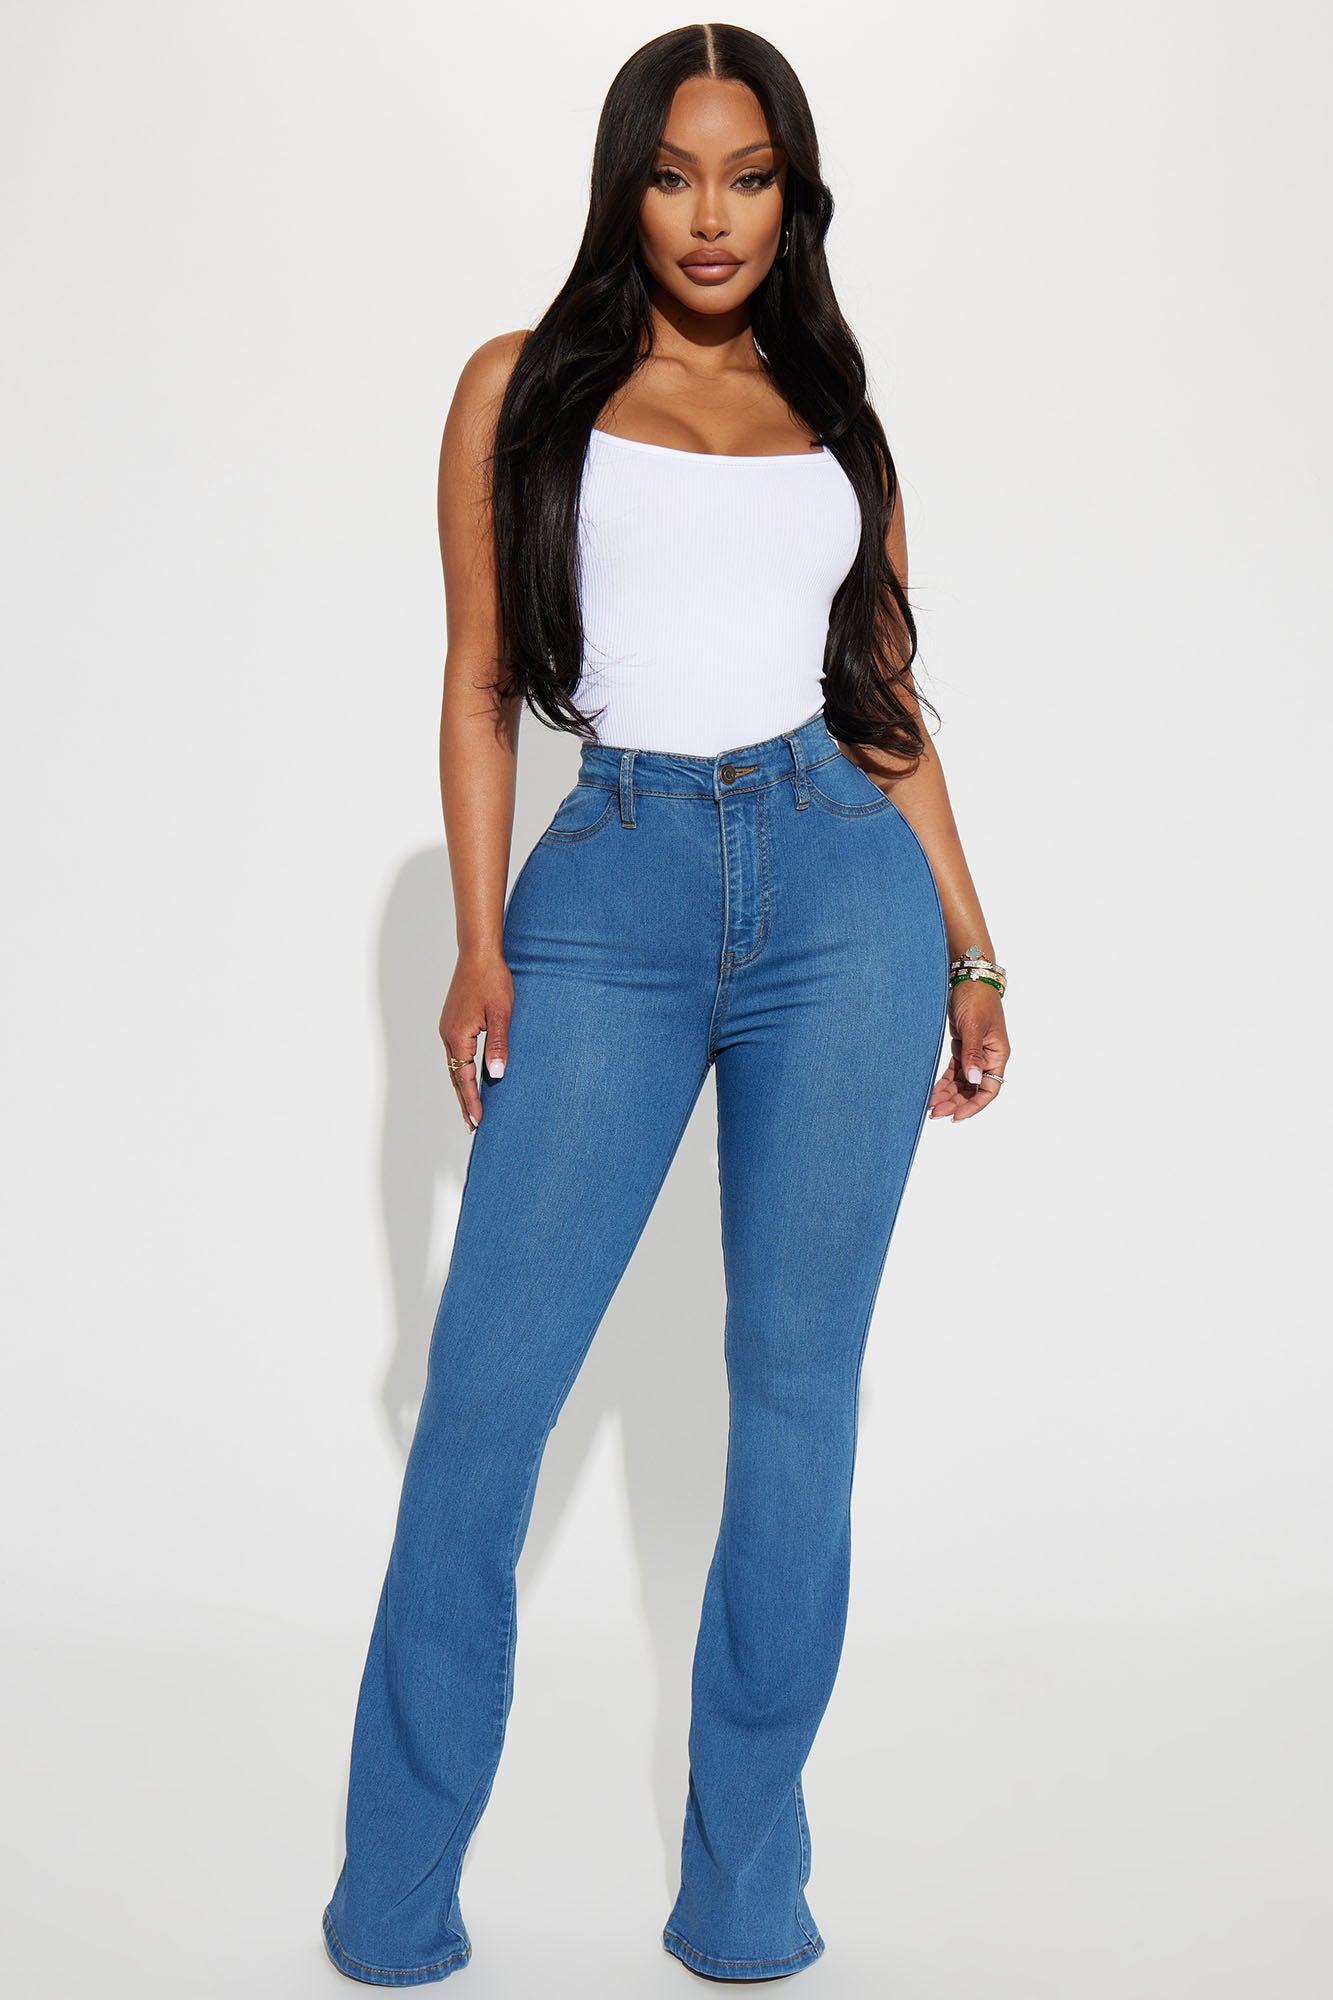 Flare jeans outfit  Flared jeans outfit fall, Outfits con jeans